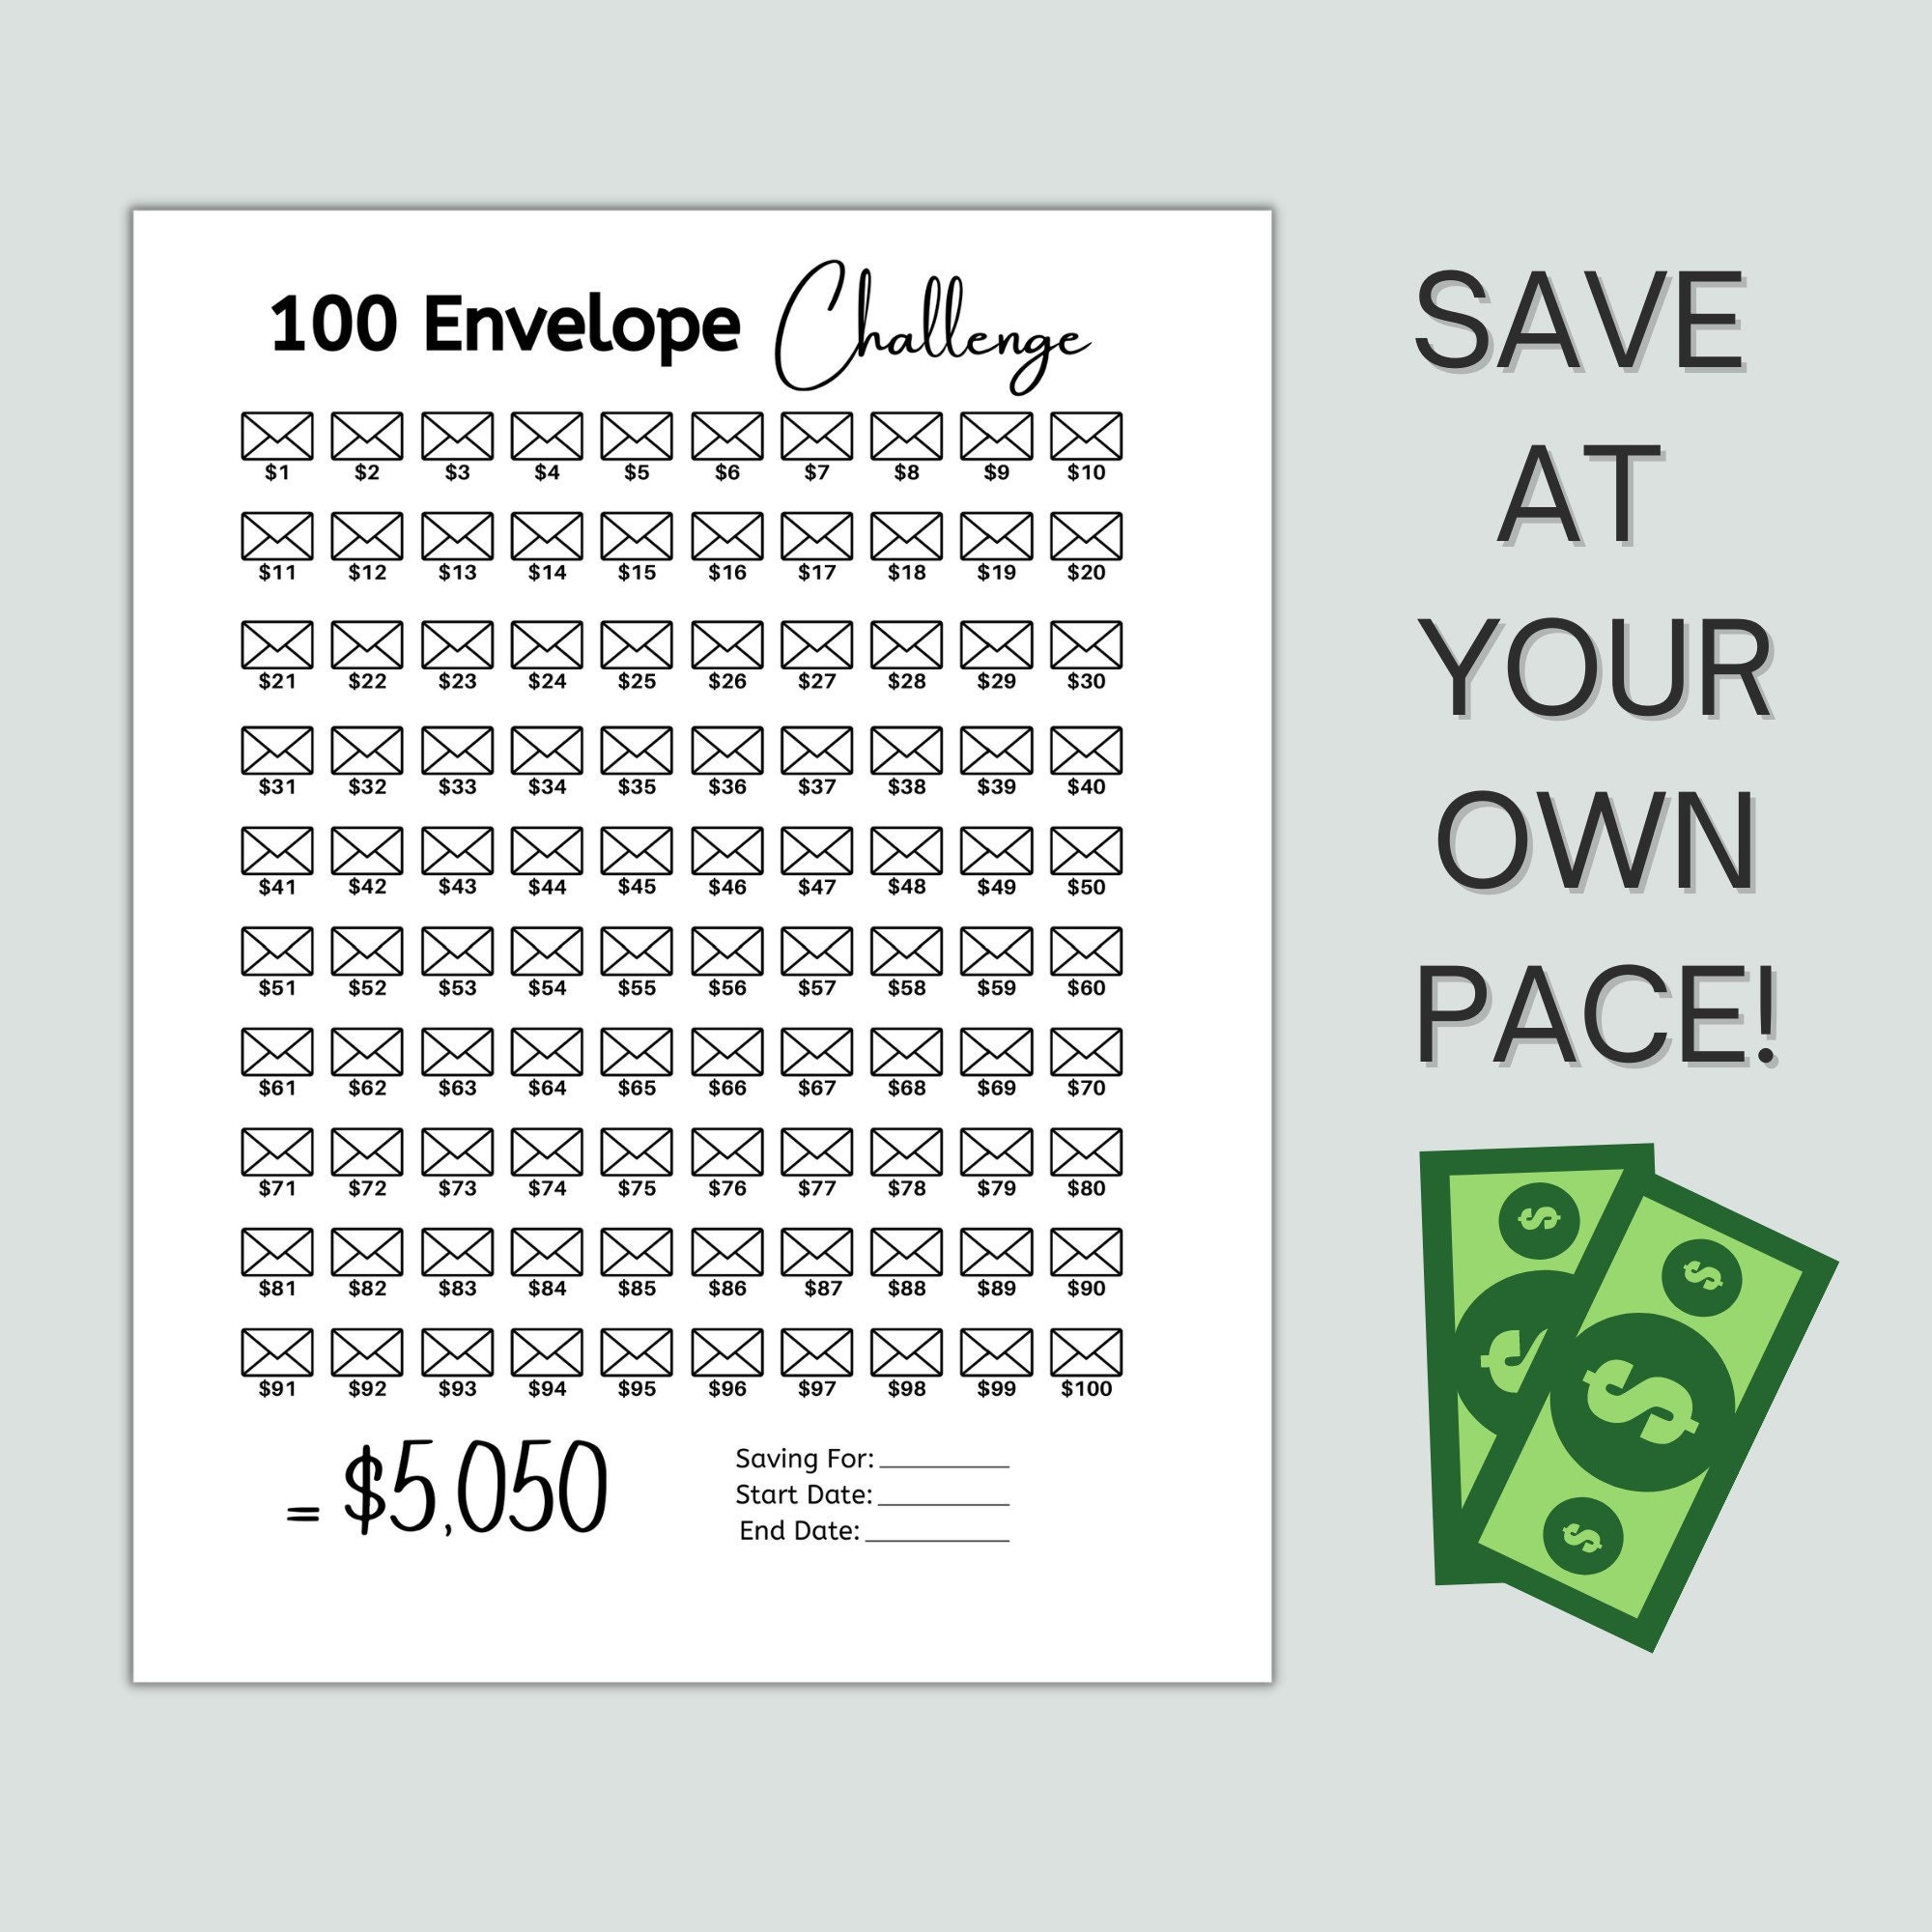 stationery-paper-party-supplies-printable-birthdays-savings-challenge